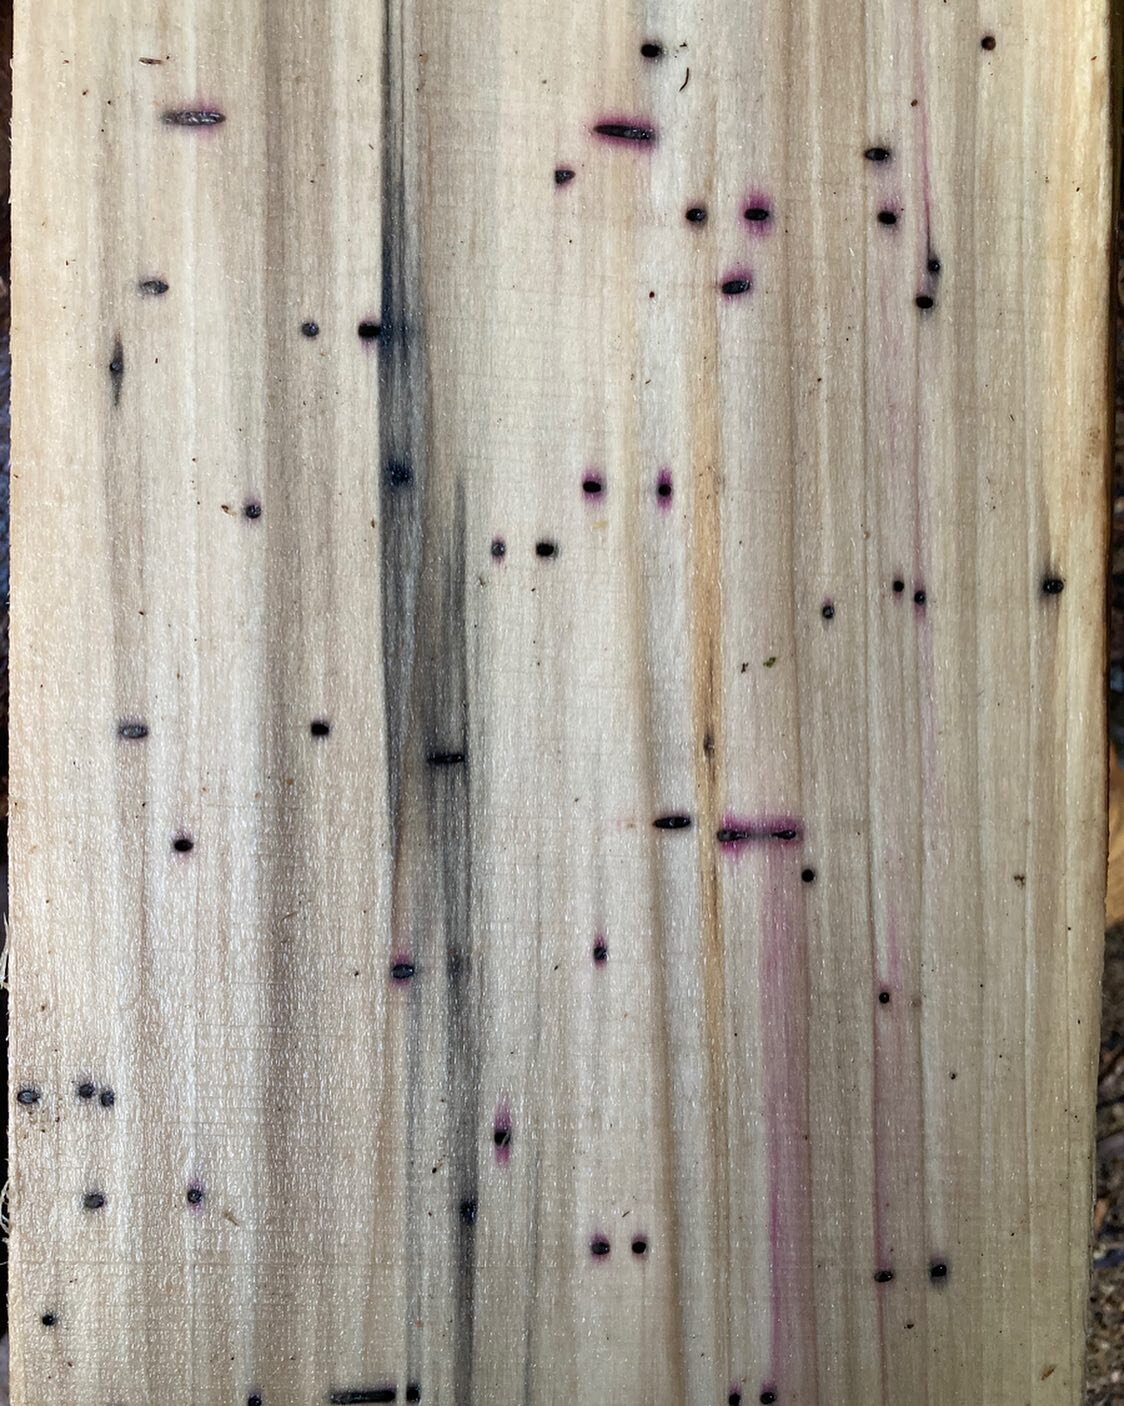 Sometimes nature is exquisite. This is spalted Tulip Poplar with purple bore holes. I should ID the pointillist critter that did this art to share credit! But they are part of the biosphere we nurture on our plot. Letting the log sit was a gamble, bu